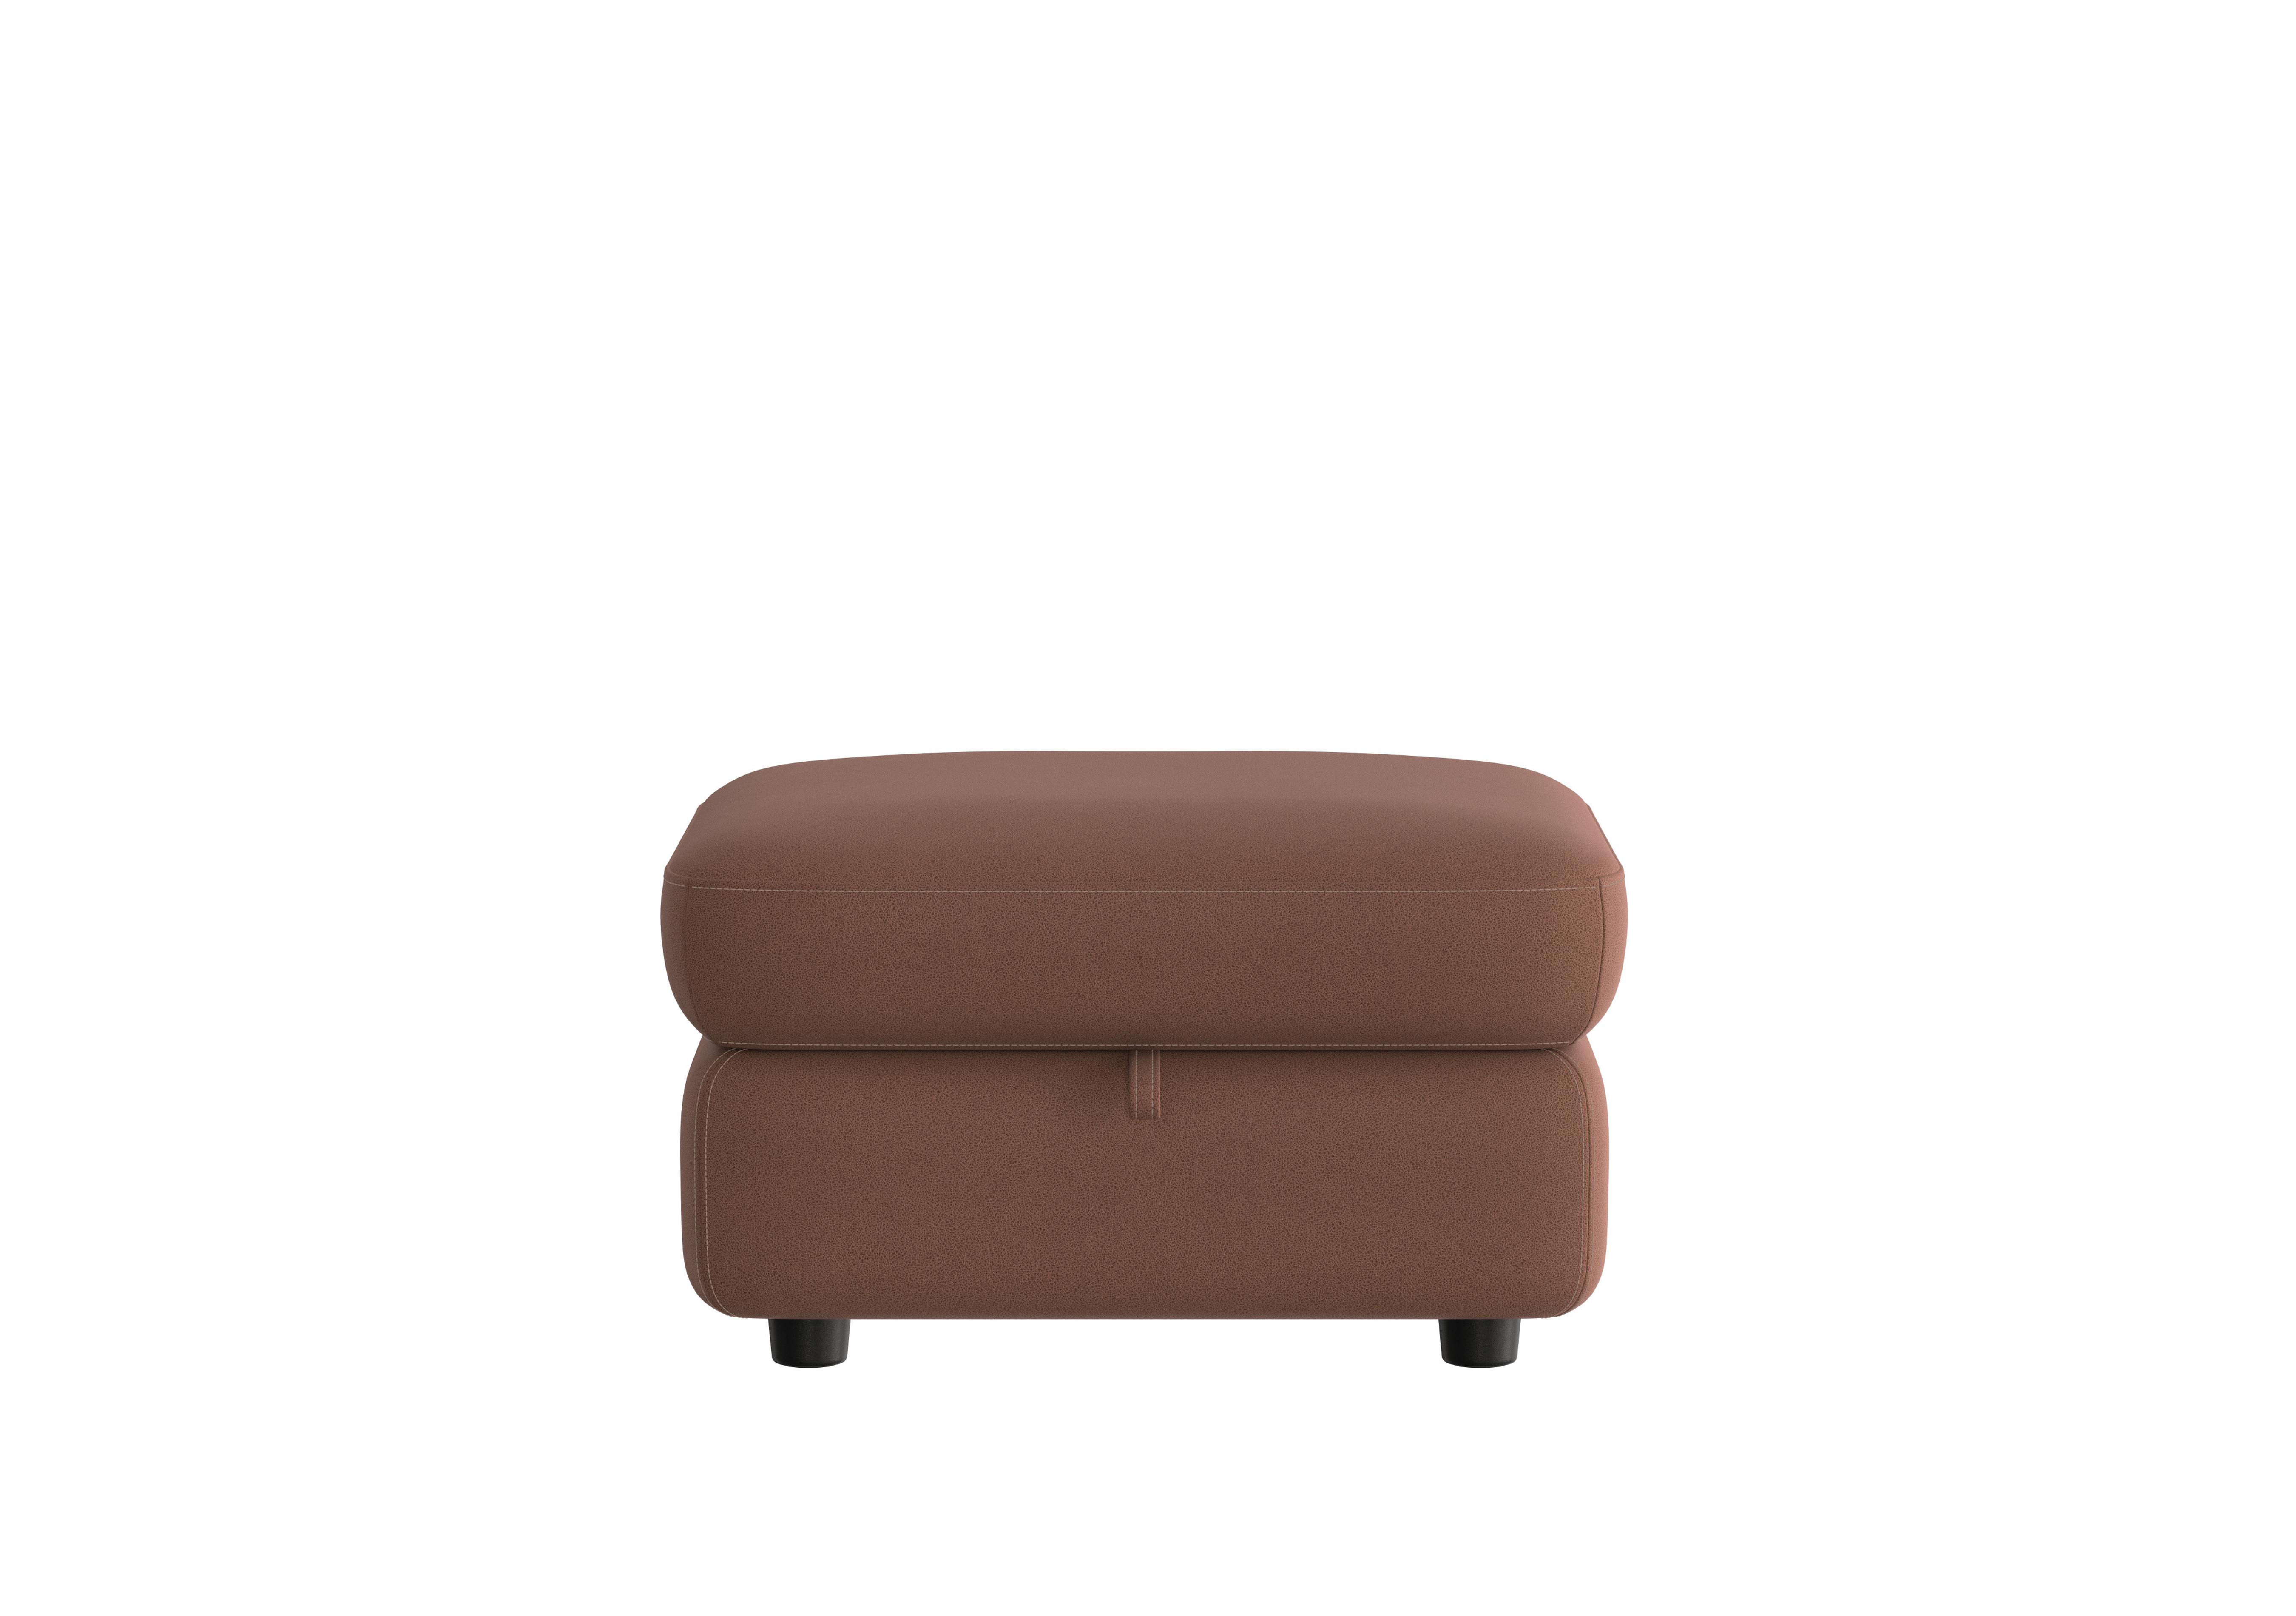 Compact Collection Piccolo Fabric Storage Footstool in Bfa-Blj-R05 Hazelnut on Furniture Village